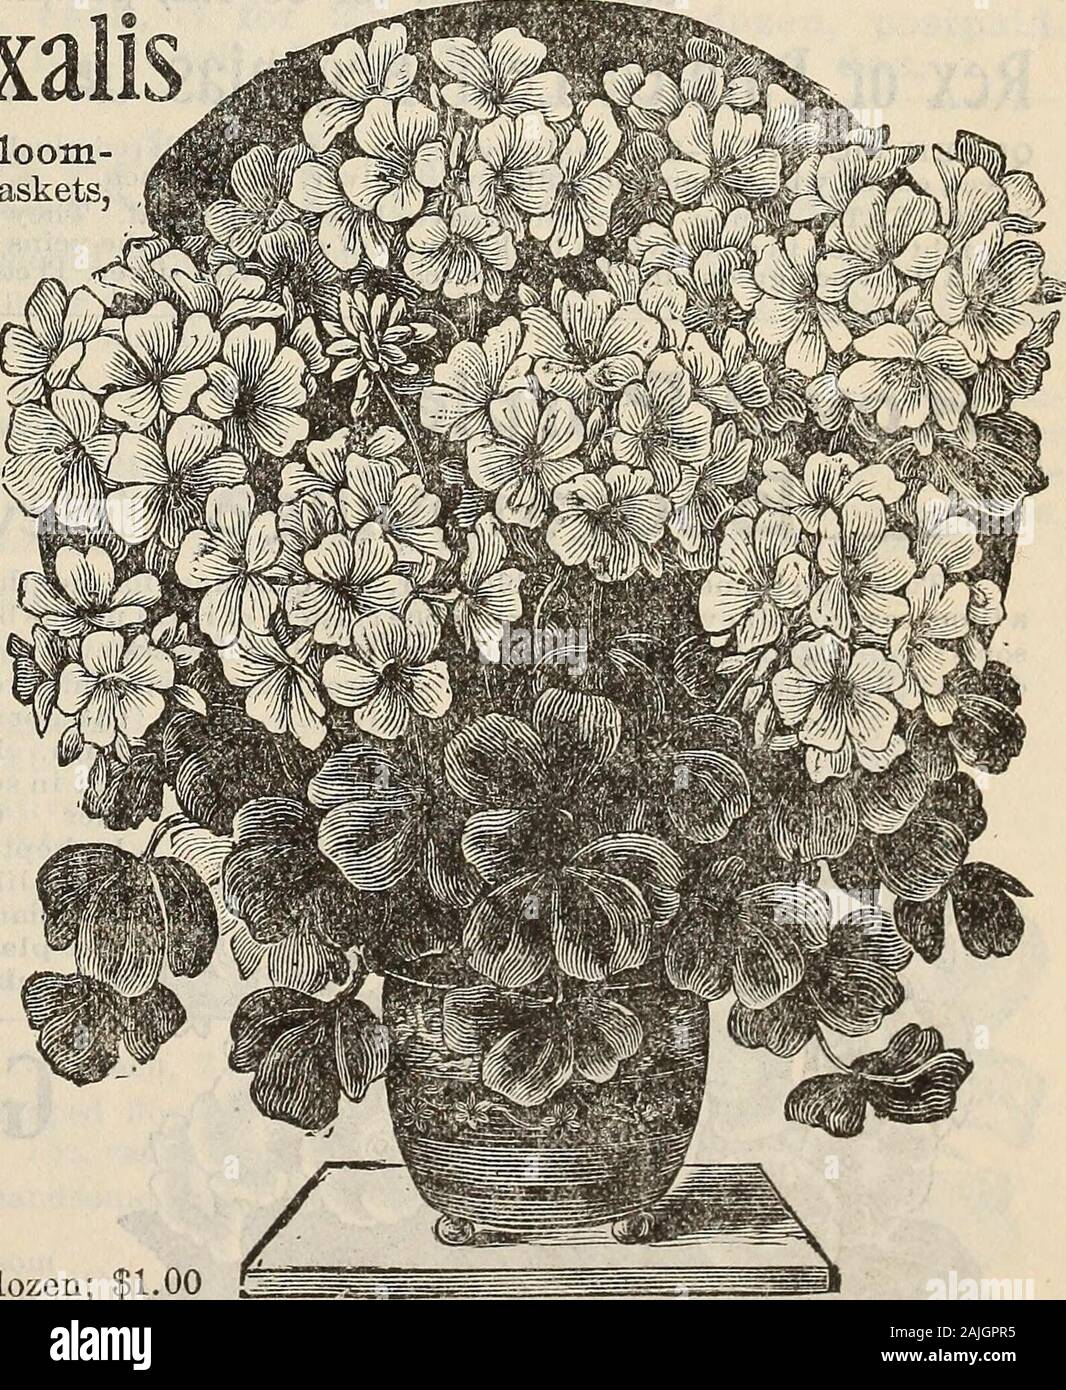 New floral guide : autumn 1899 . indow boxes, etc. They begin bloom-ing very quickly and continue to throw outtheir lovely buds and bloosoms every day allWinter Nothing liner for window culture. Bermuda Butter Cup Oxalis.—One of the finest Winter-blooming plants everseen, a strong vigorous grower with hand-some foliage, and bearing a constant suc-cession of lovely yellow flowers all Winter.Well-grown plants have produced as high asseventy flower stems at one time, and overone thousand flowers in a season. 4 cts.each, 3 for 10 cts., 35 cts. per doz. Oxalis Boweii.—Large flowers, bright richpink Stock Photo